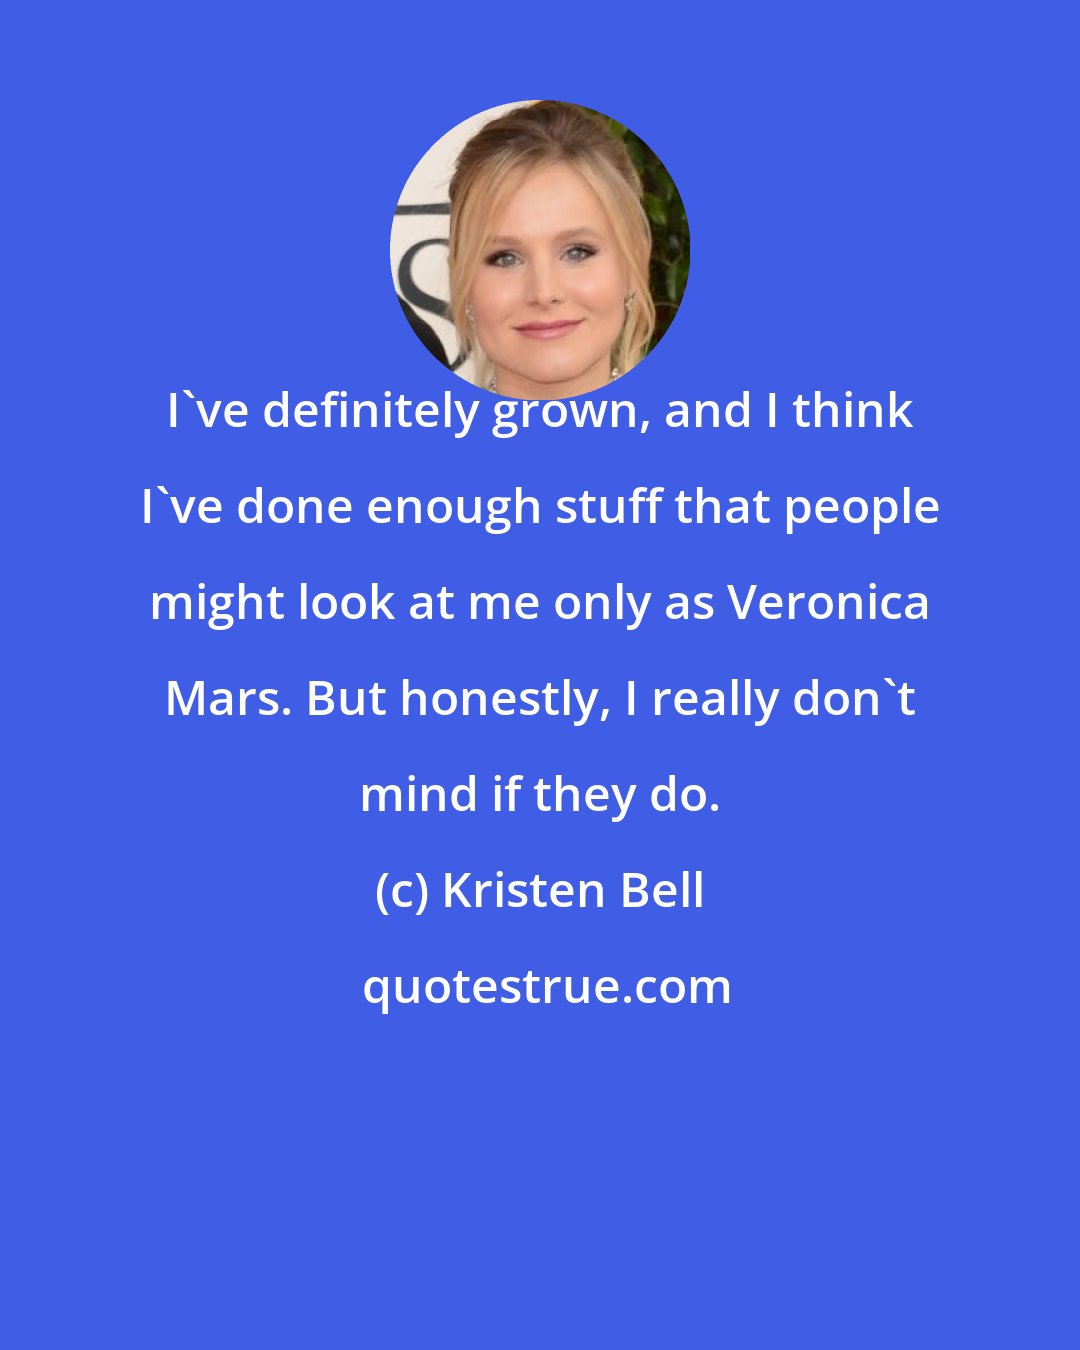 Kristen Bell: I've definitely grown, and I think I've done enough stuff that people might look at me only as Veronica Mars. But honestly, I really don't mind if they do.